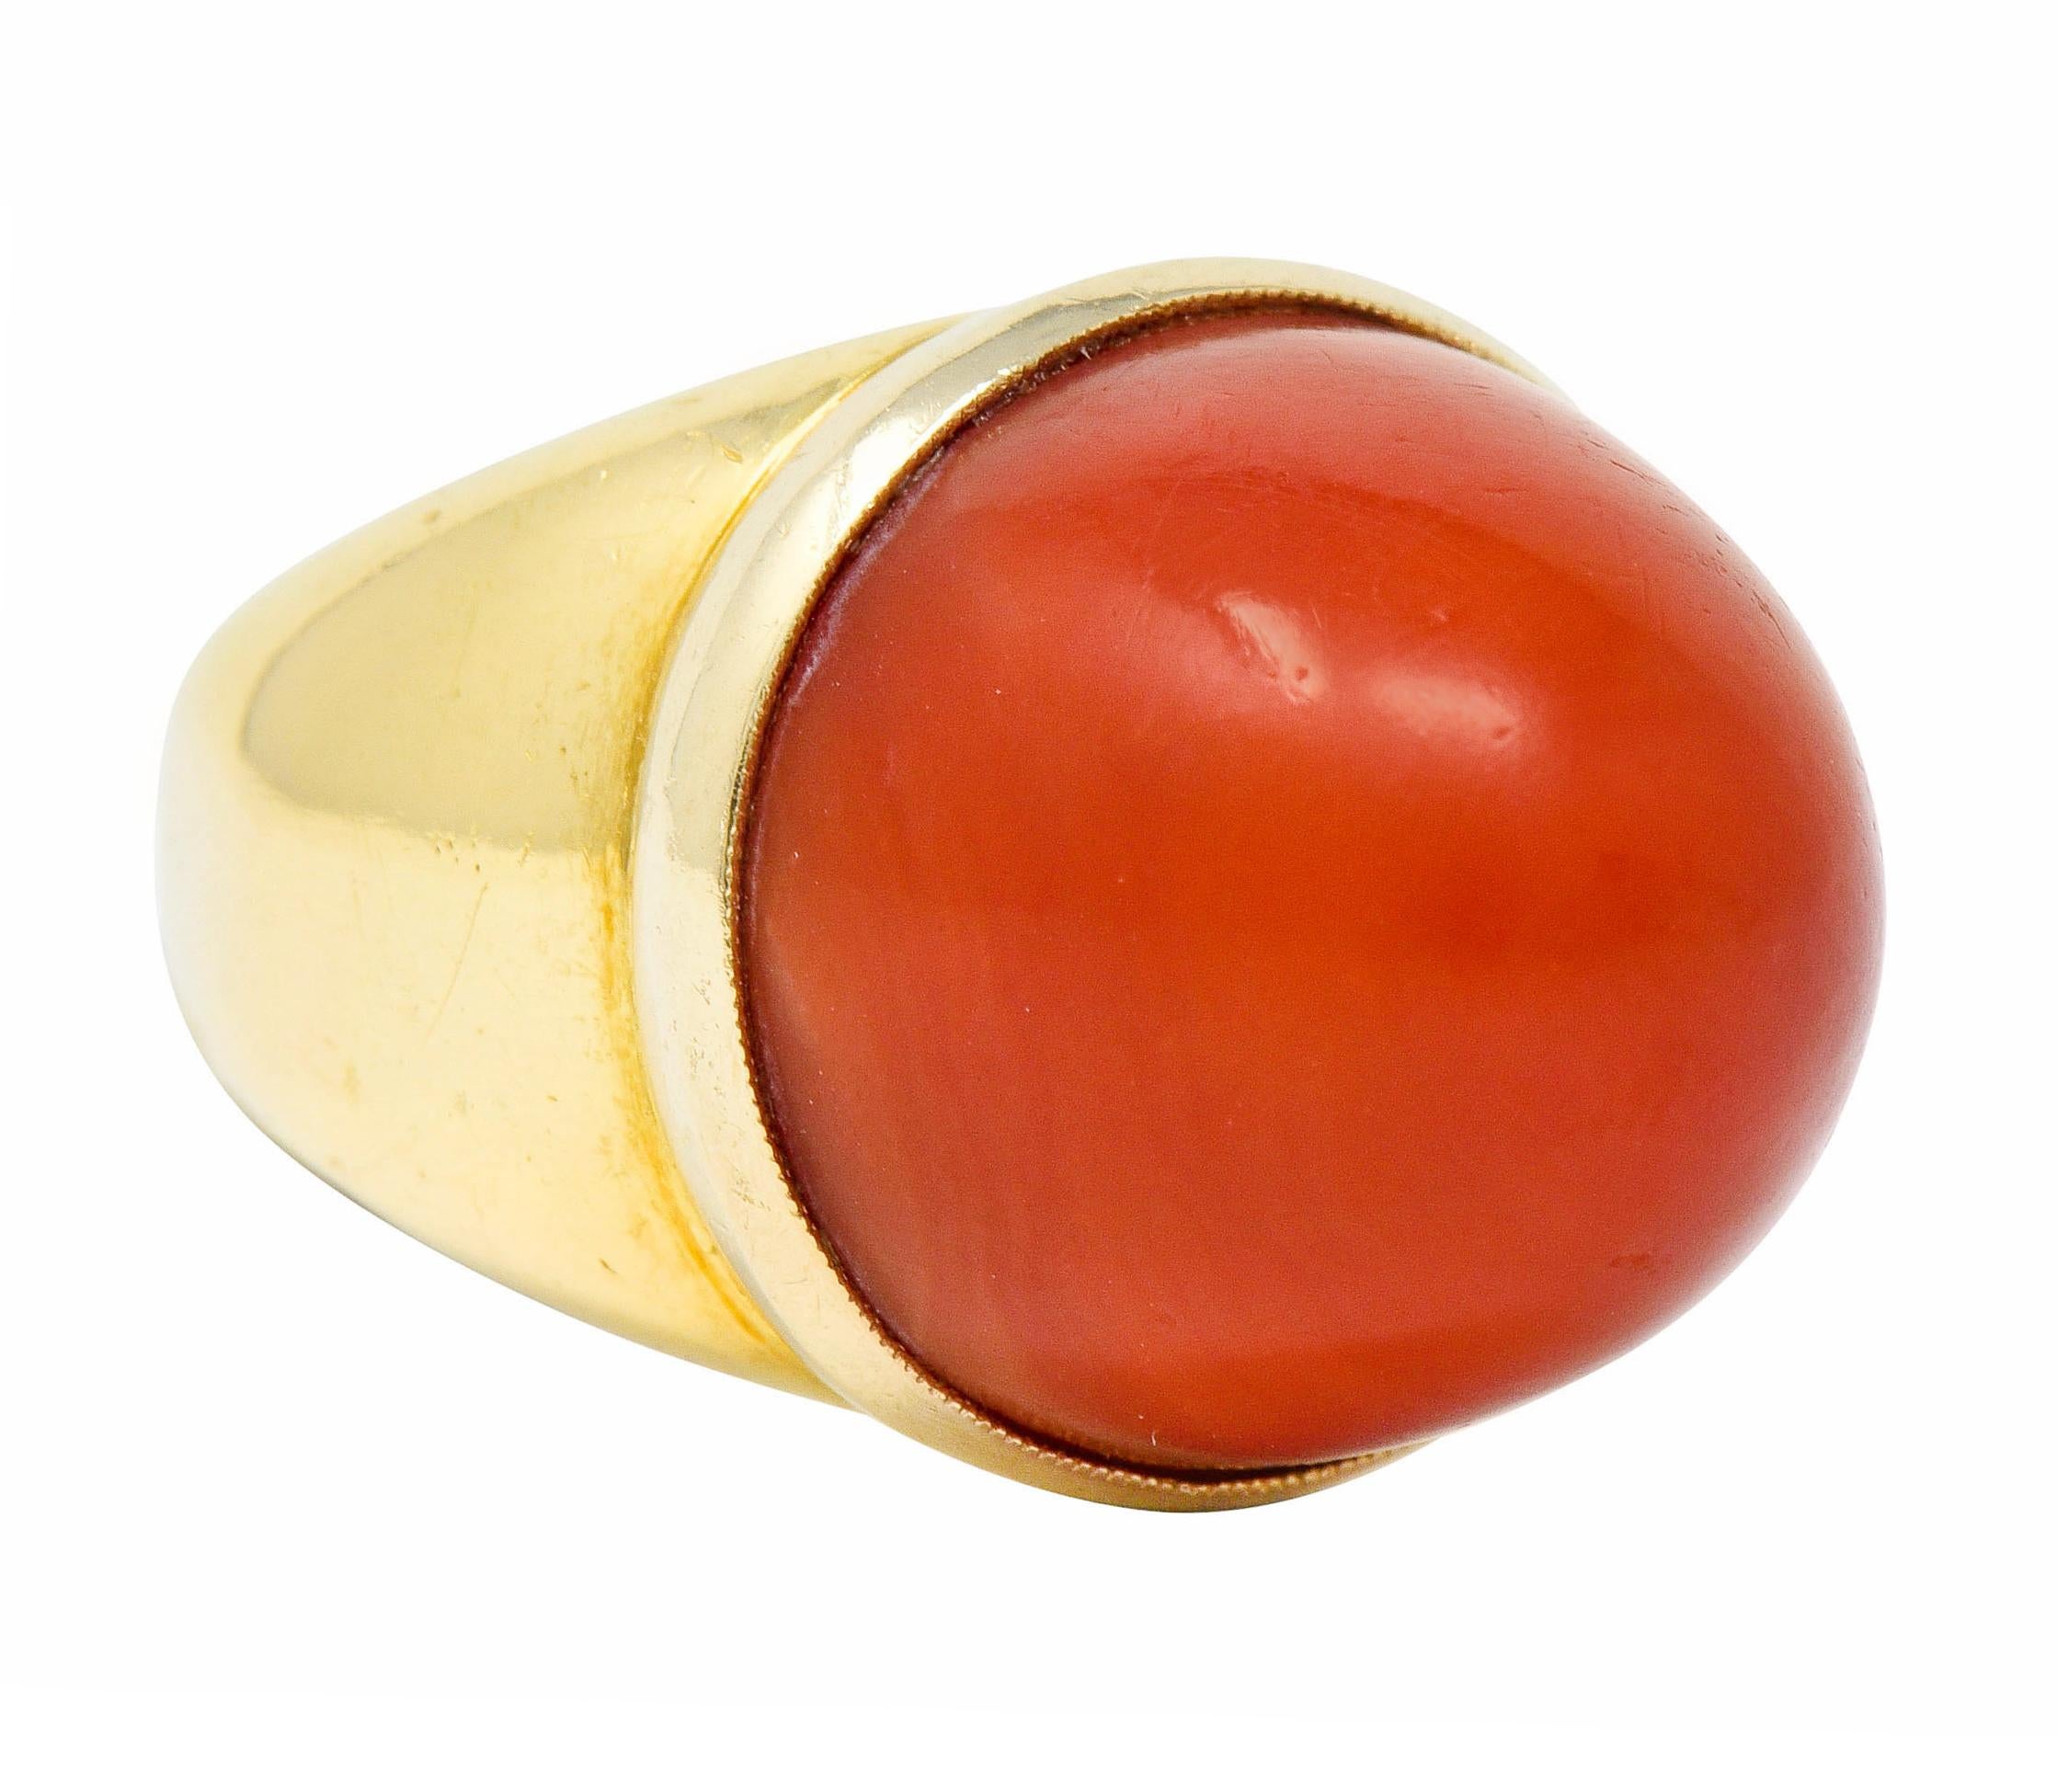 Centering a towering coral bullet cabochon, opaque and a strongly reddish-orange color with moderate swirled color distribution

Bezel set in a polished gold mounting

Tested as 18 karat gold

Circa: 1960s

Ring Size: 5 3/4 & sizable

Measures: 17.8